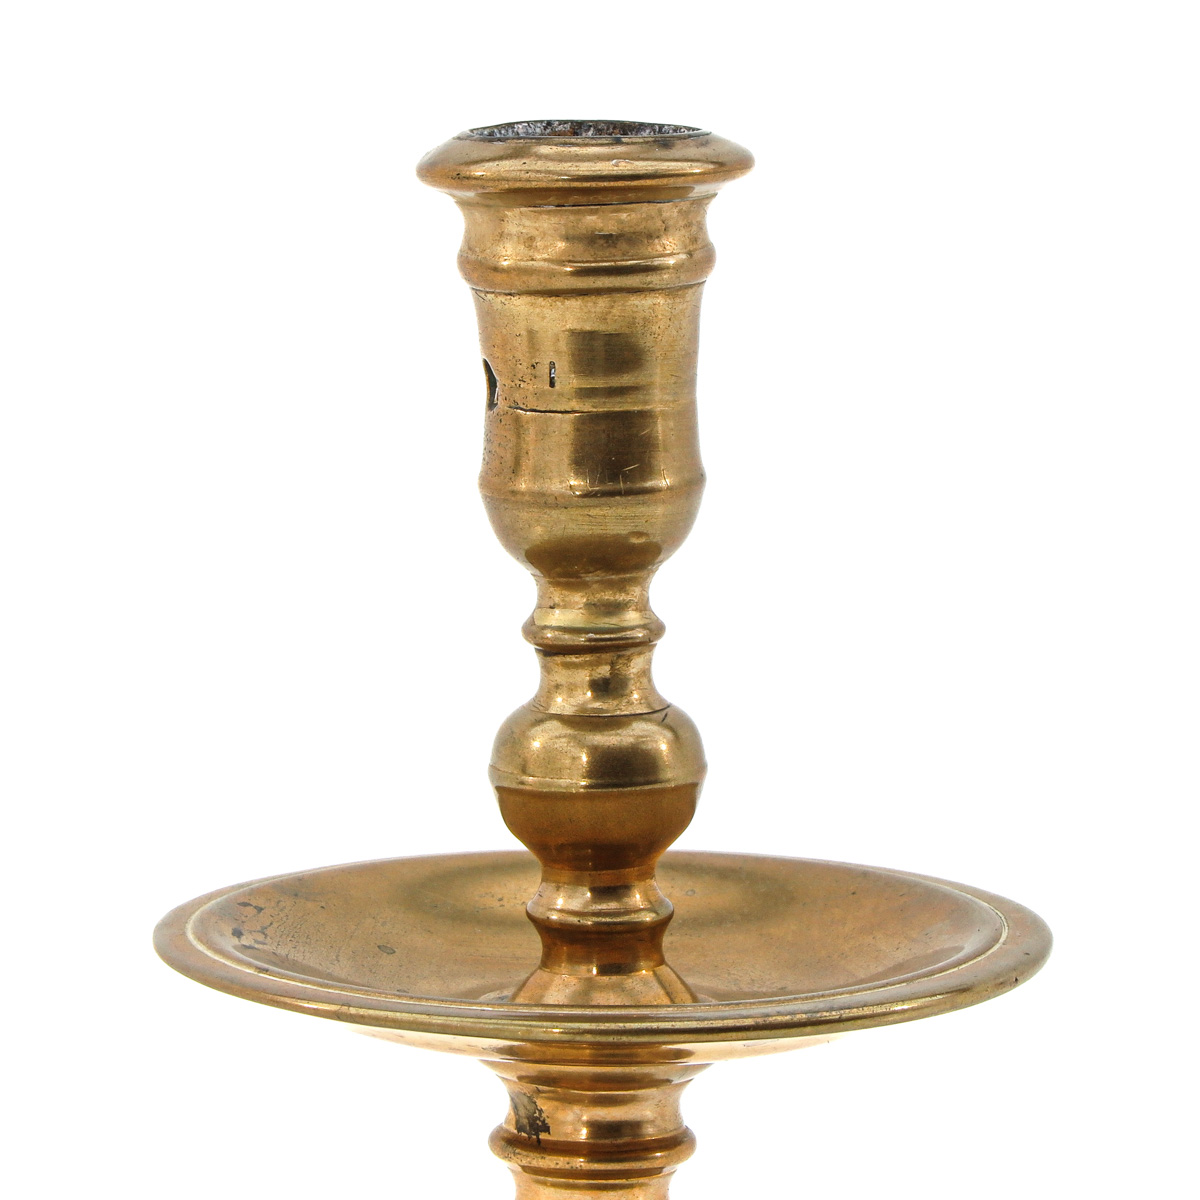 A 17th Century Bronze Candlestick - Image 7 of 8